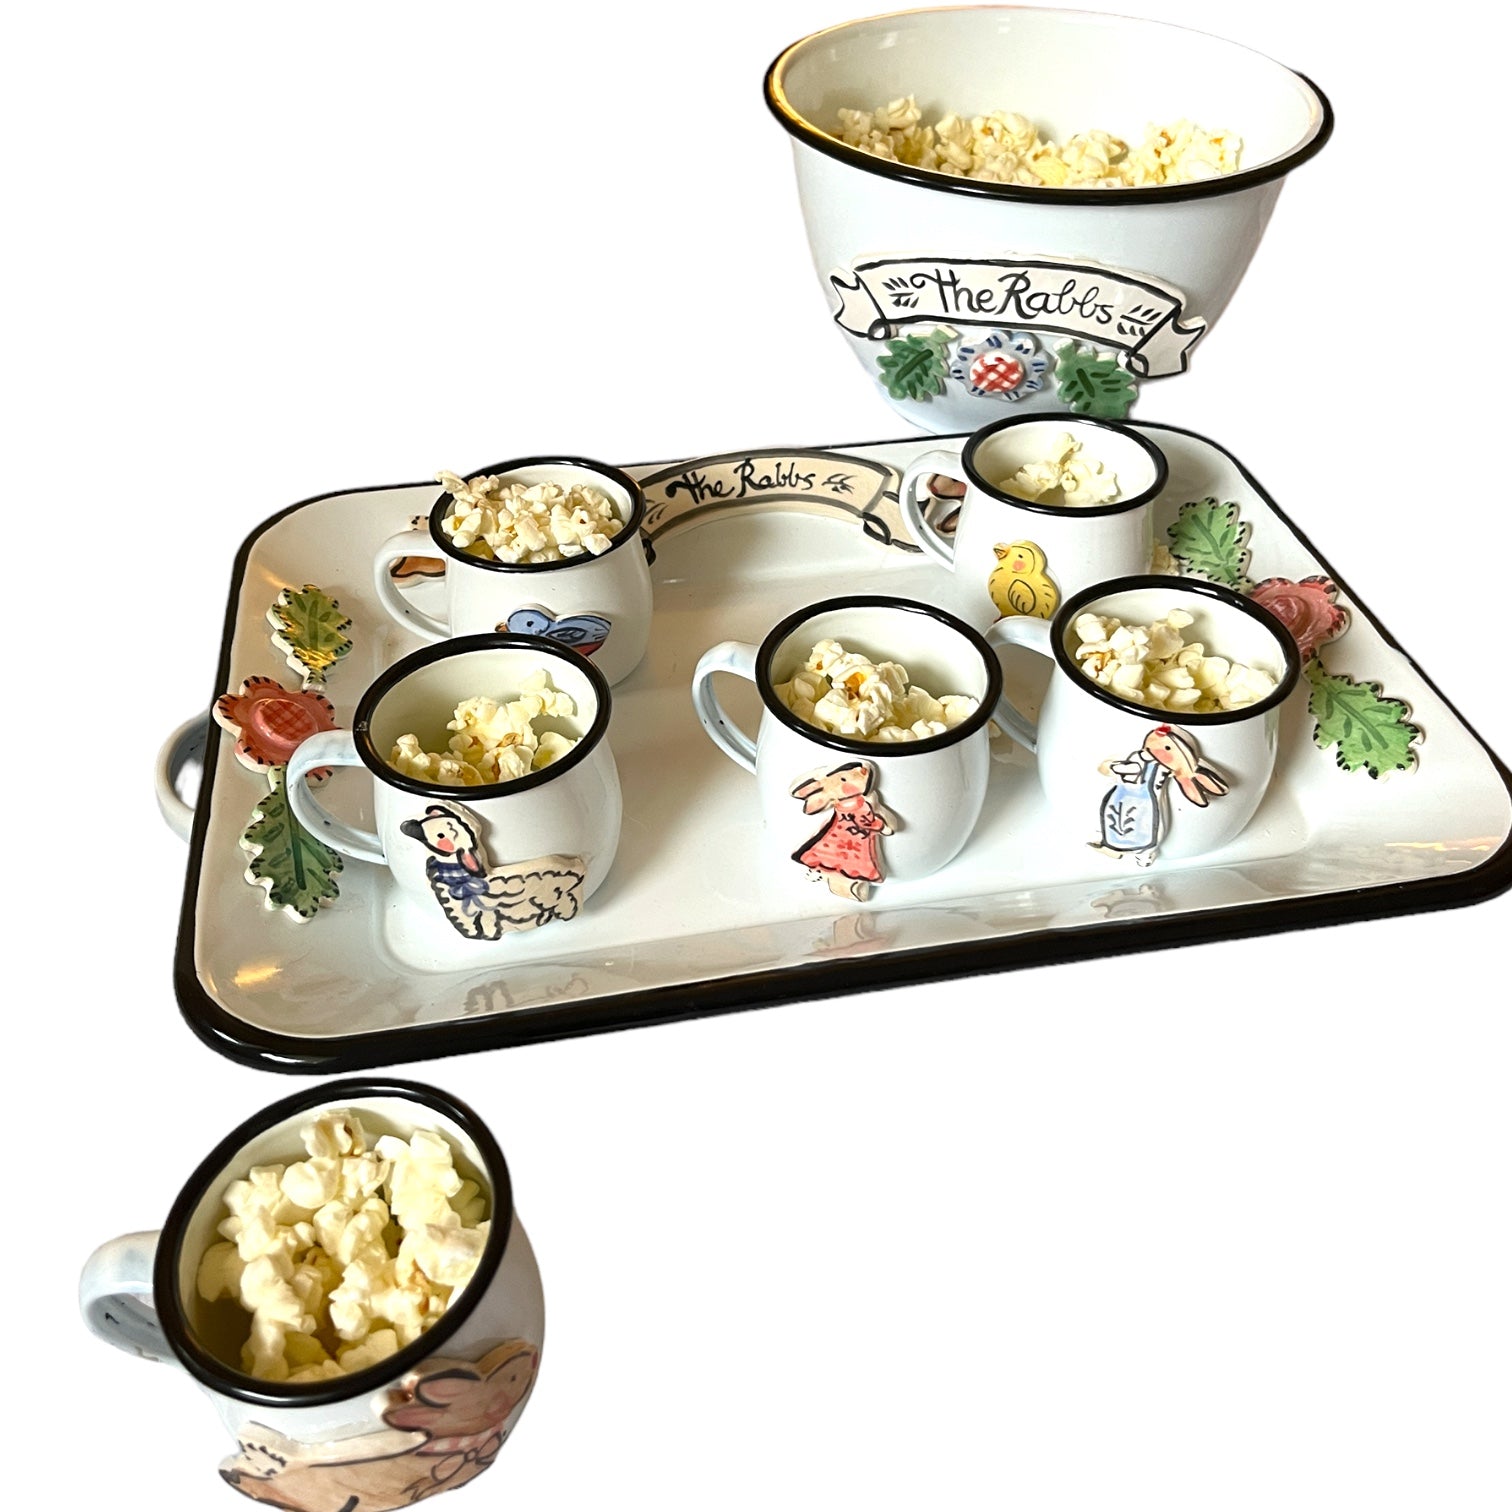 Popcorn Bowl set with Tray and 6 cups - Premium  from Tricia Lowenfield Shop 